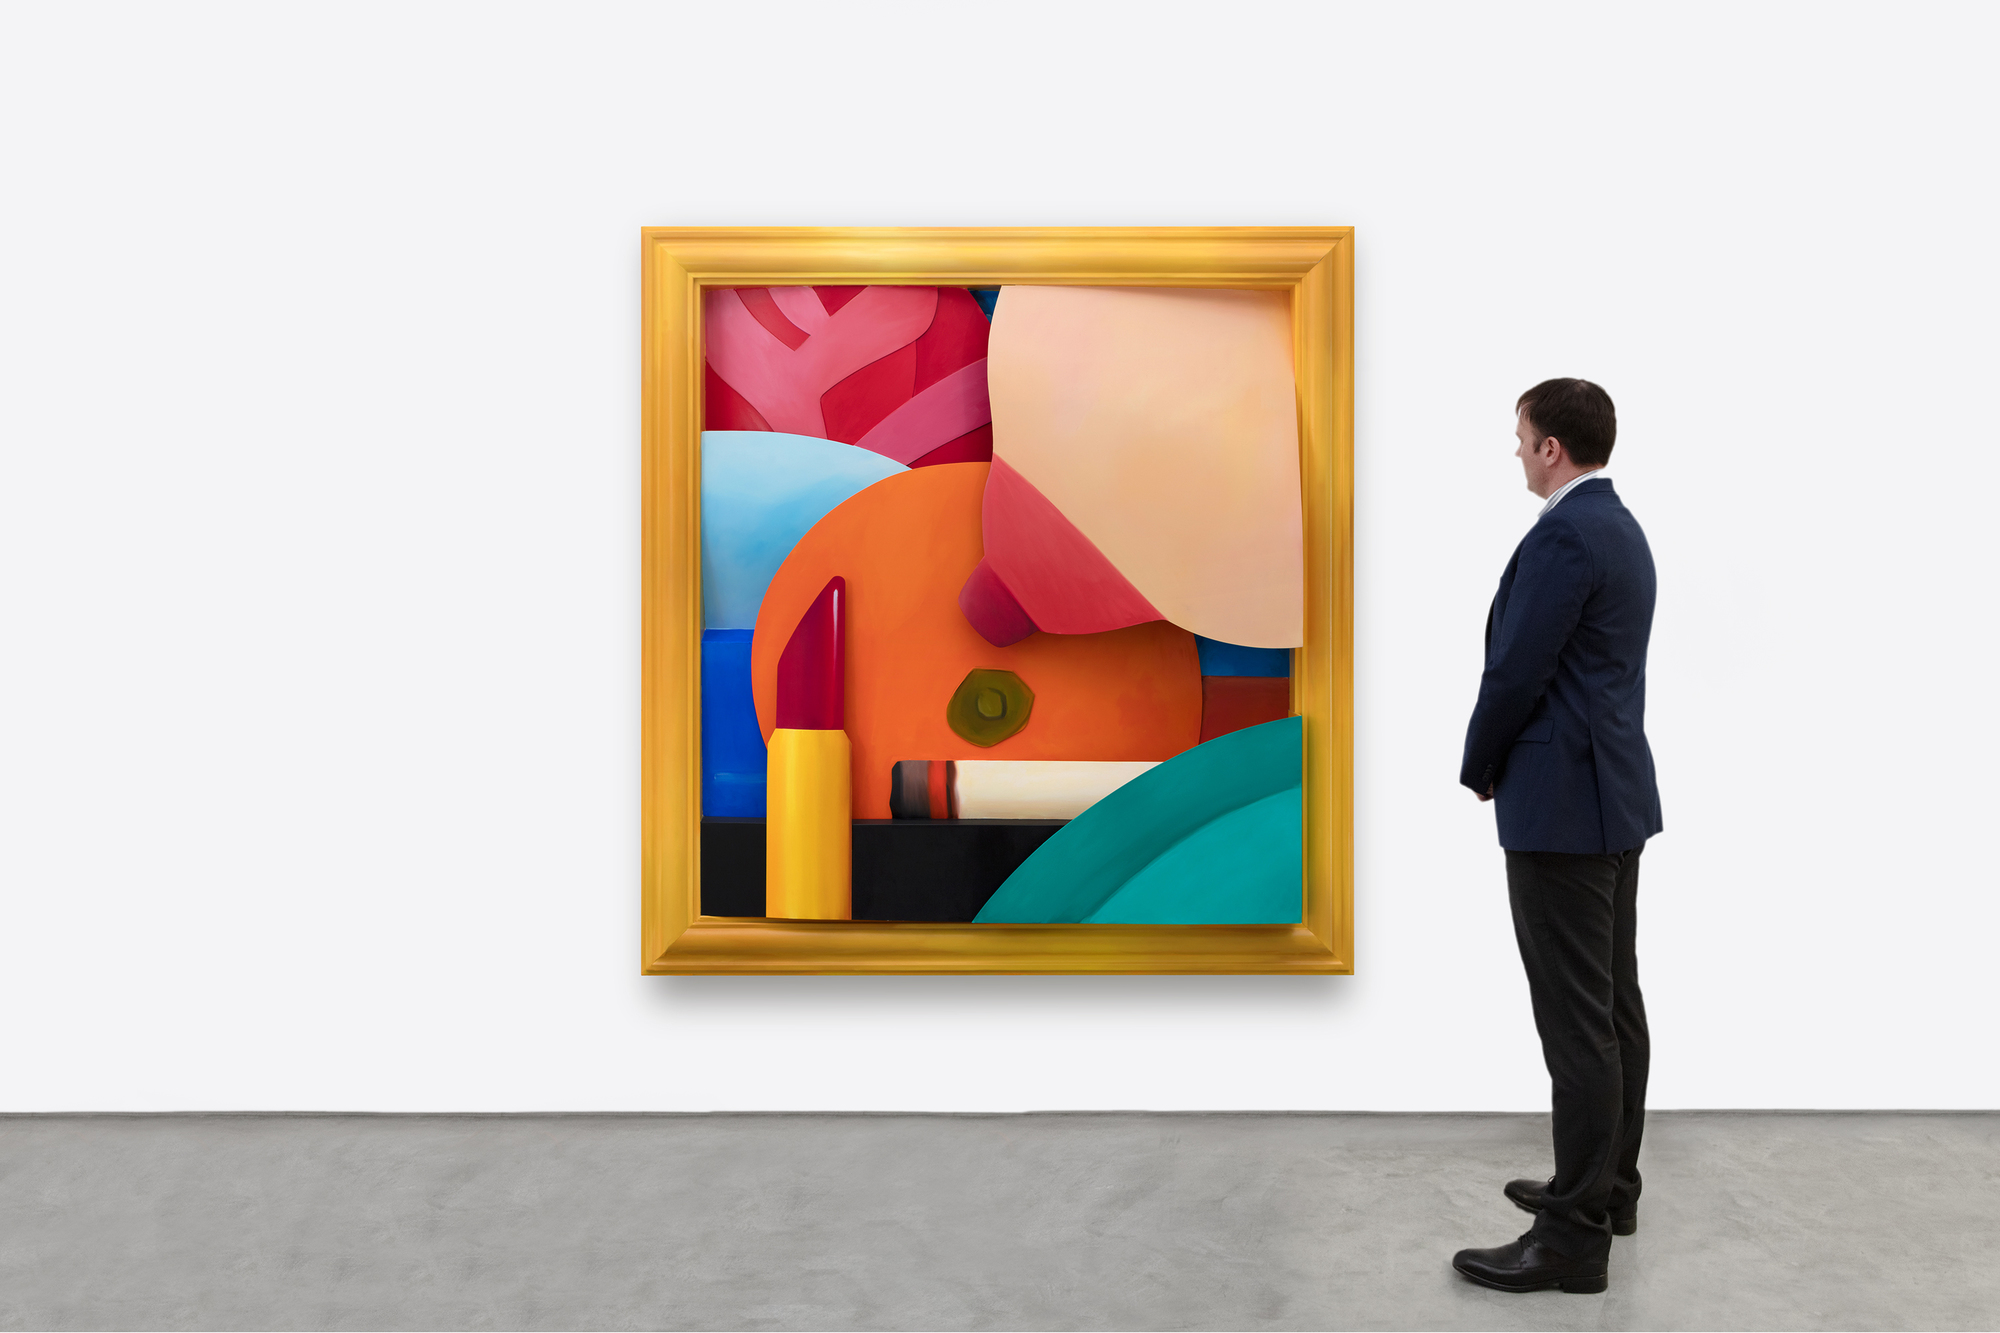 Tom Wesselmann was a leader of the Pop Art movement. He is best remembered for large-scale works, including his Great American Nude series, in which Wesselmann combined sensual imagery with everyday objects depicted in bold and vibrant colors. As he developed in his practice, Wesselmann grew beyond the traditional canvas format and began creating shaped canvases and aluminum cut-outs that often functioned as sculptural drawings. Continuing his interest in playing with scale, Wesselmann began focusing more closely on the body parts that make up his nudes. He created his Mouth series and his Bedroom series in which particular elements, rather than the entire sitter, become the focus.
<br> 
<br>Bedroom Breast (2004) combines these techniques, using vivid hues painted on cut-out aluminum. The work was a special commission for a private collector's residence, and the idea of a bedroom breast piece in oil on 3-D cut-out aluminum was one Wesselmann had been working with for many years prior to this work's creation. The current owner of the piece believed in Wesselmann's vision and loved the idea of bringing the subject to his home.
<br>
<br>It's one of, if not the last, piece Wesselmann completed before he passed away. The present work is the only piece of its kind - there has never been an oil on aluminum in 3D at this scale or of this iconography.  